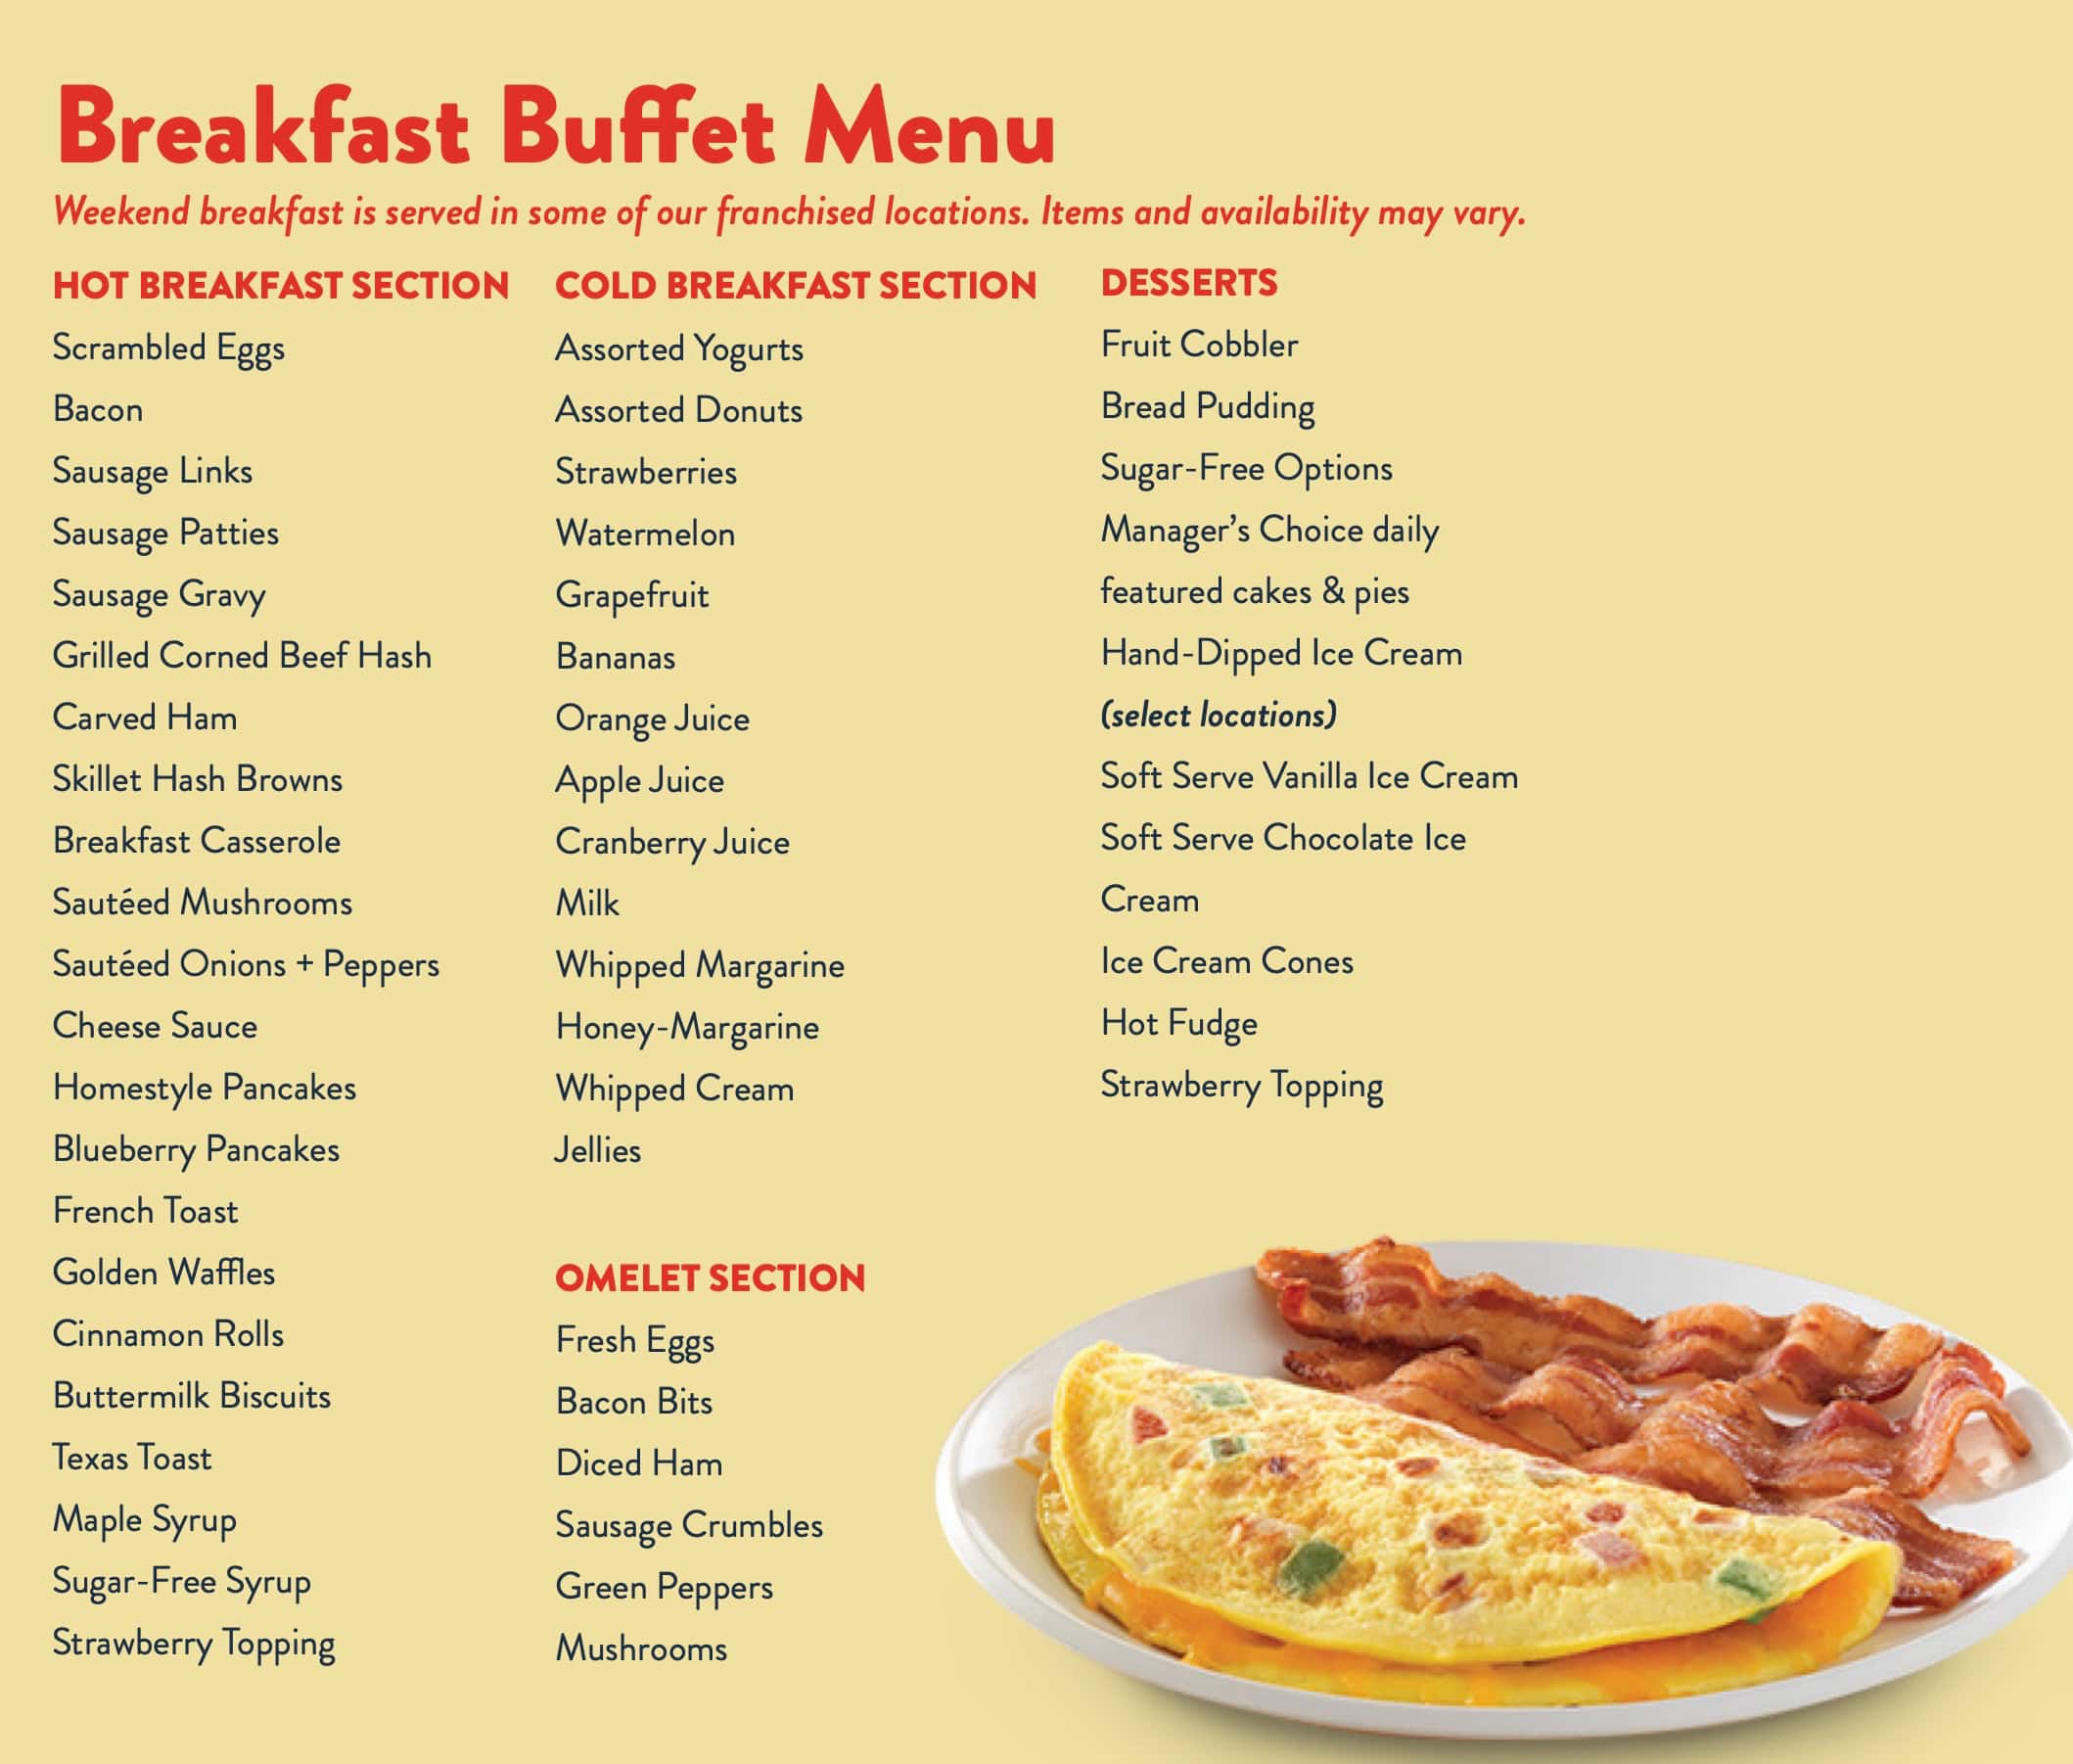 Golden Corral Menu With Price